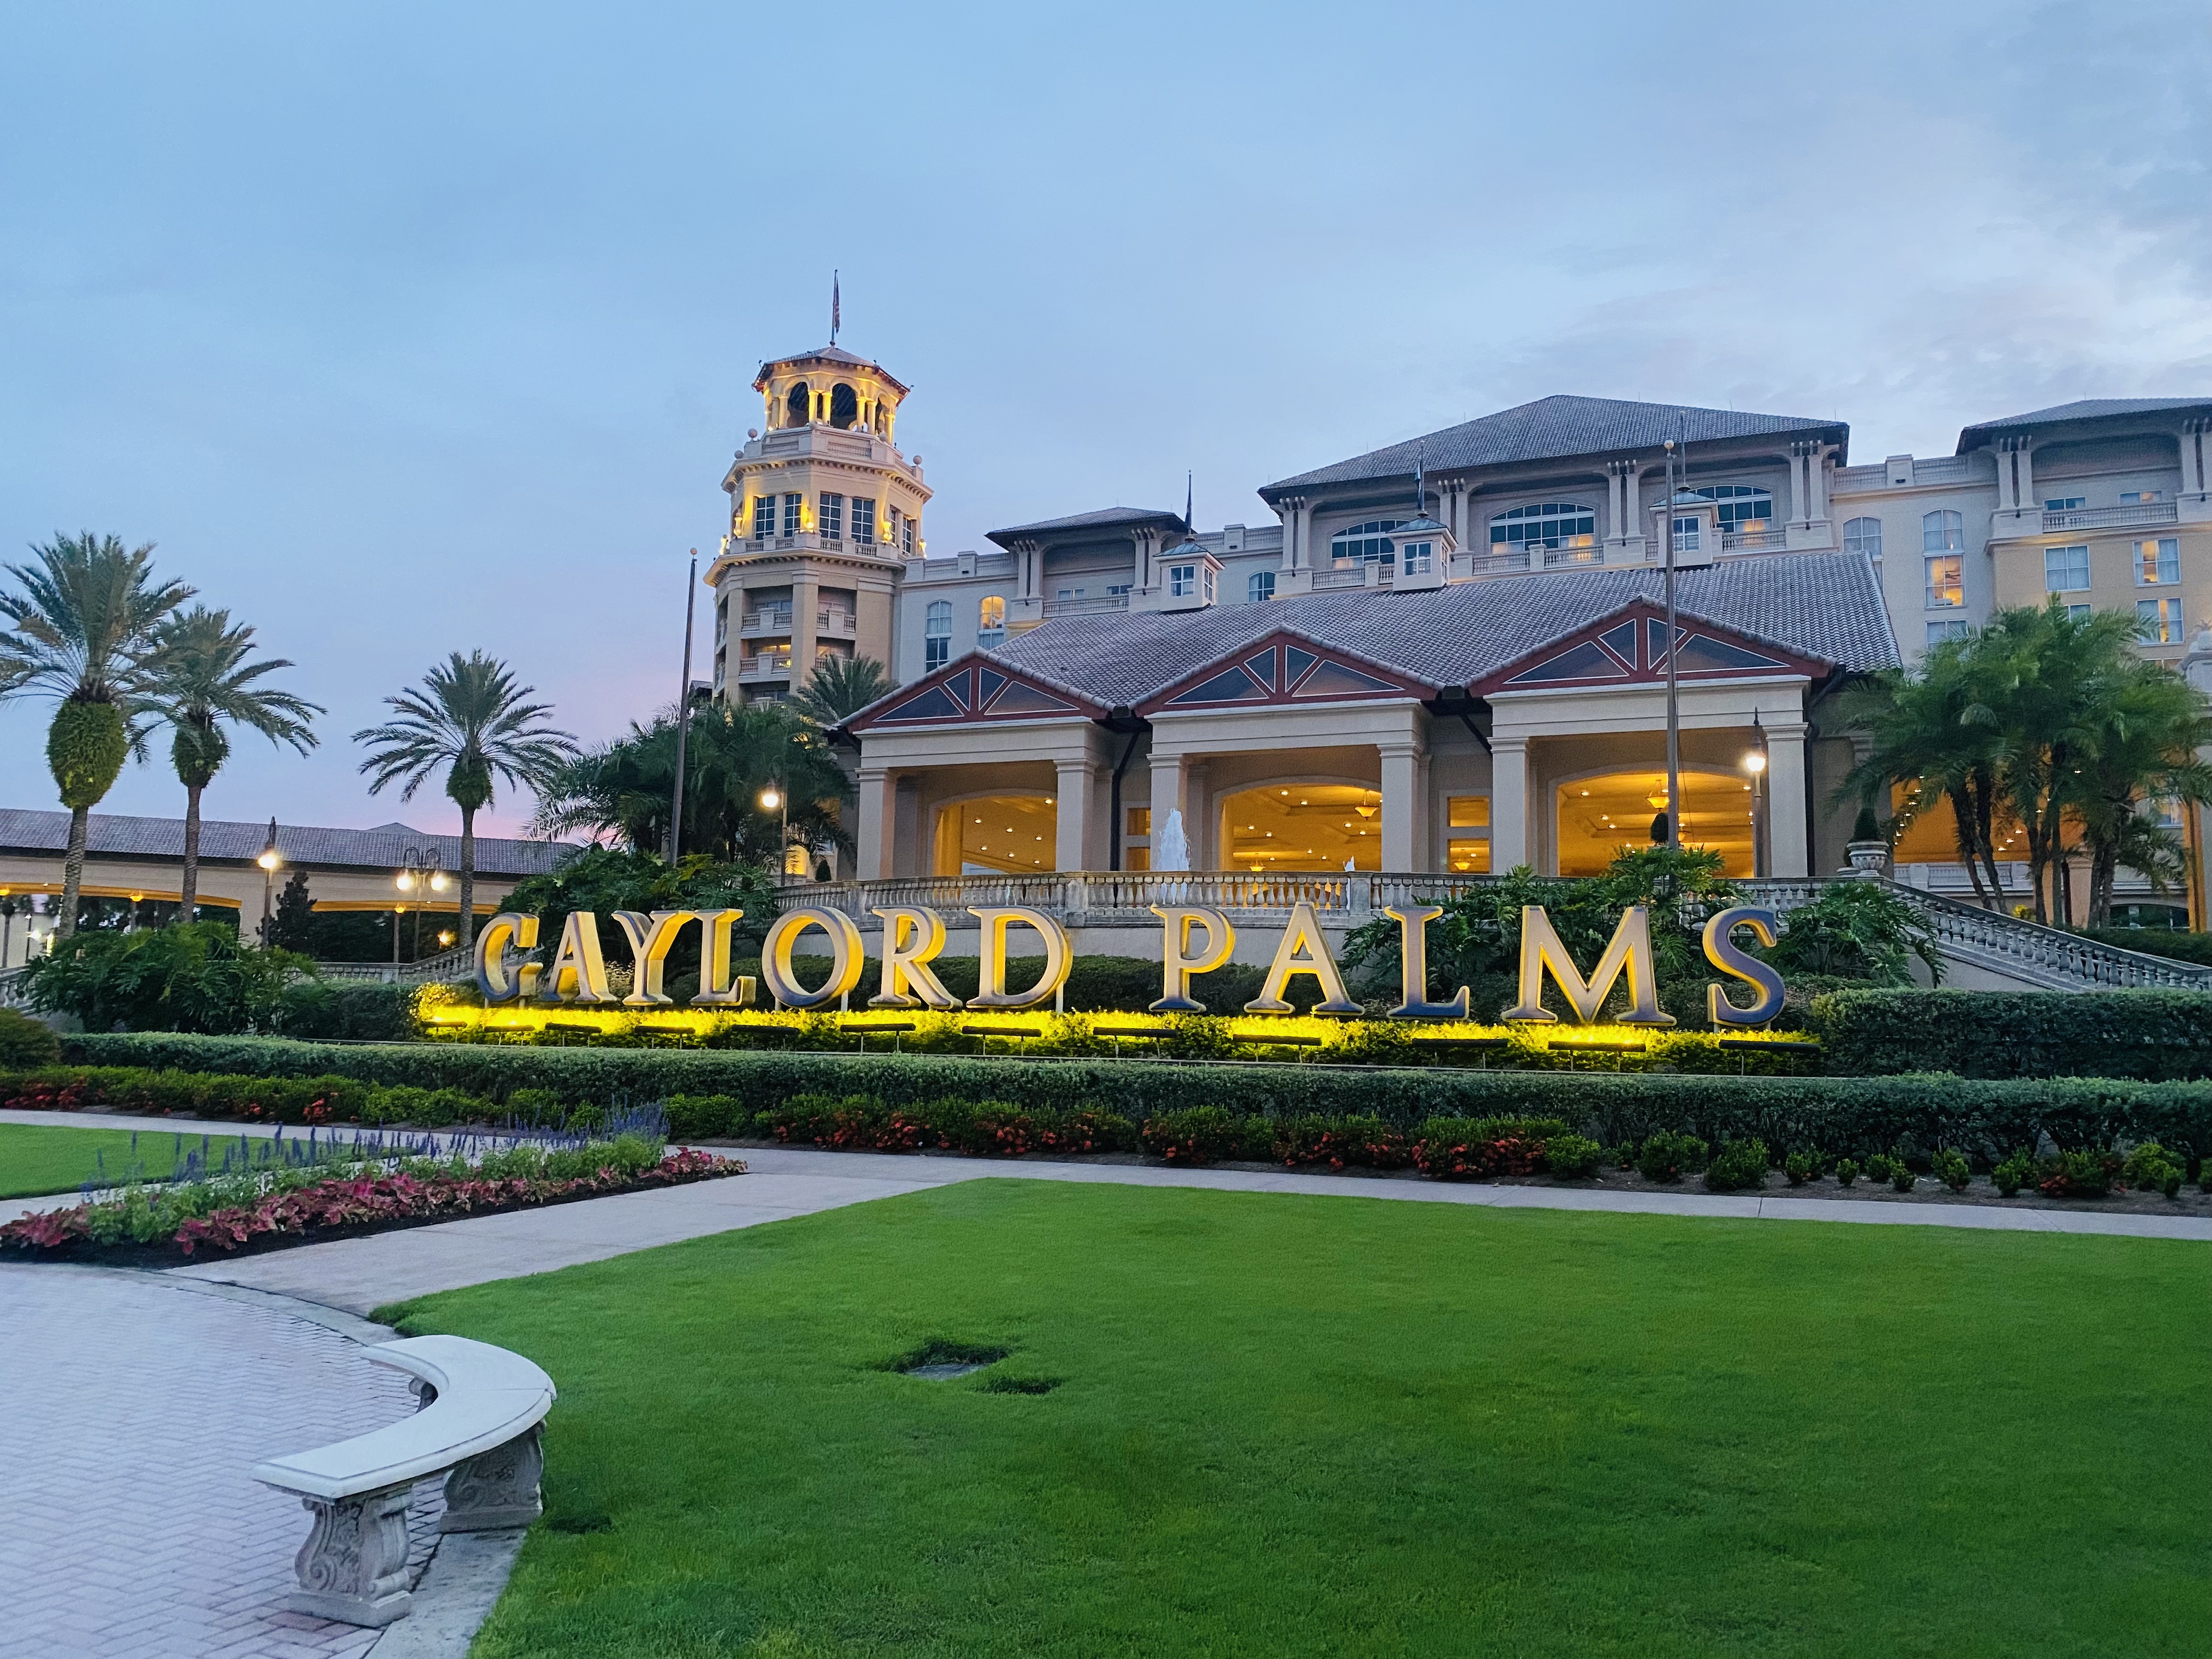 Gaylord Palms Resort and Convention Center